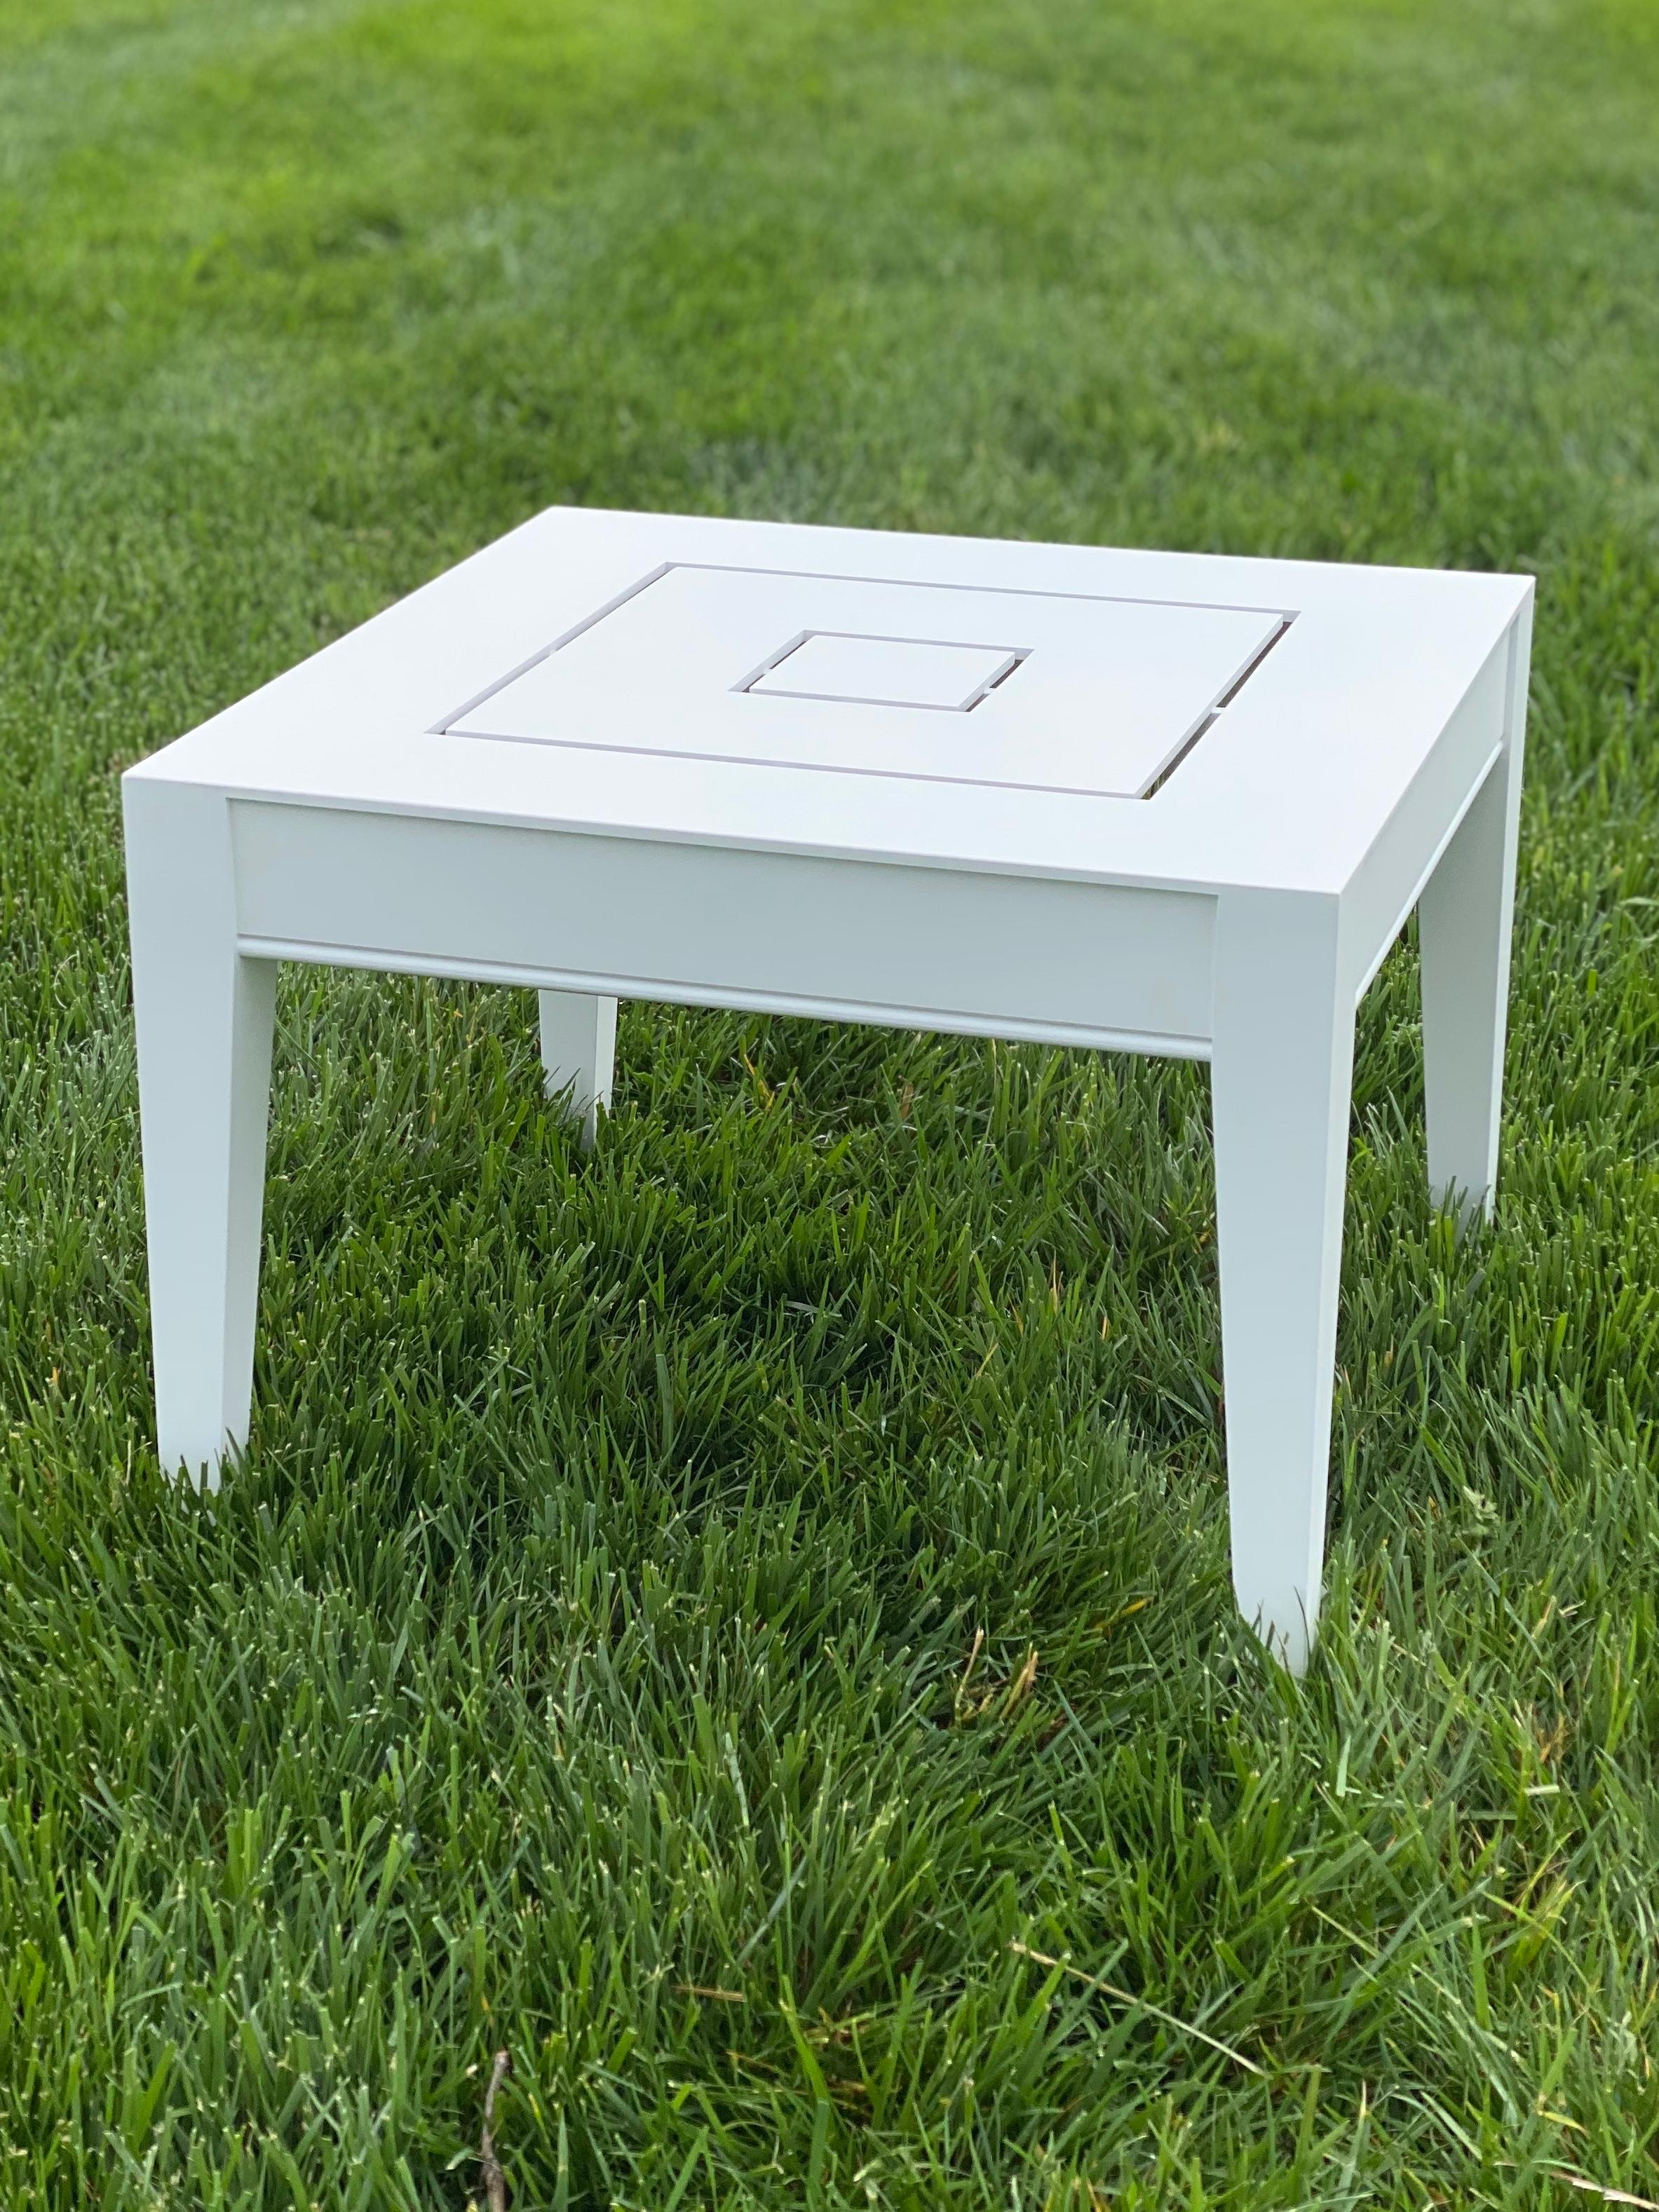 Aluminum Wyatt Square Side Table, Outdoor Garden Furniture by McKinnon and Harris 